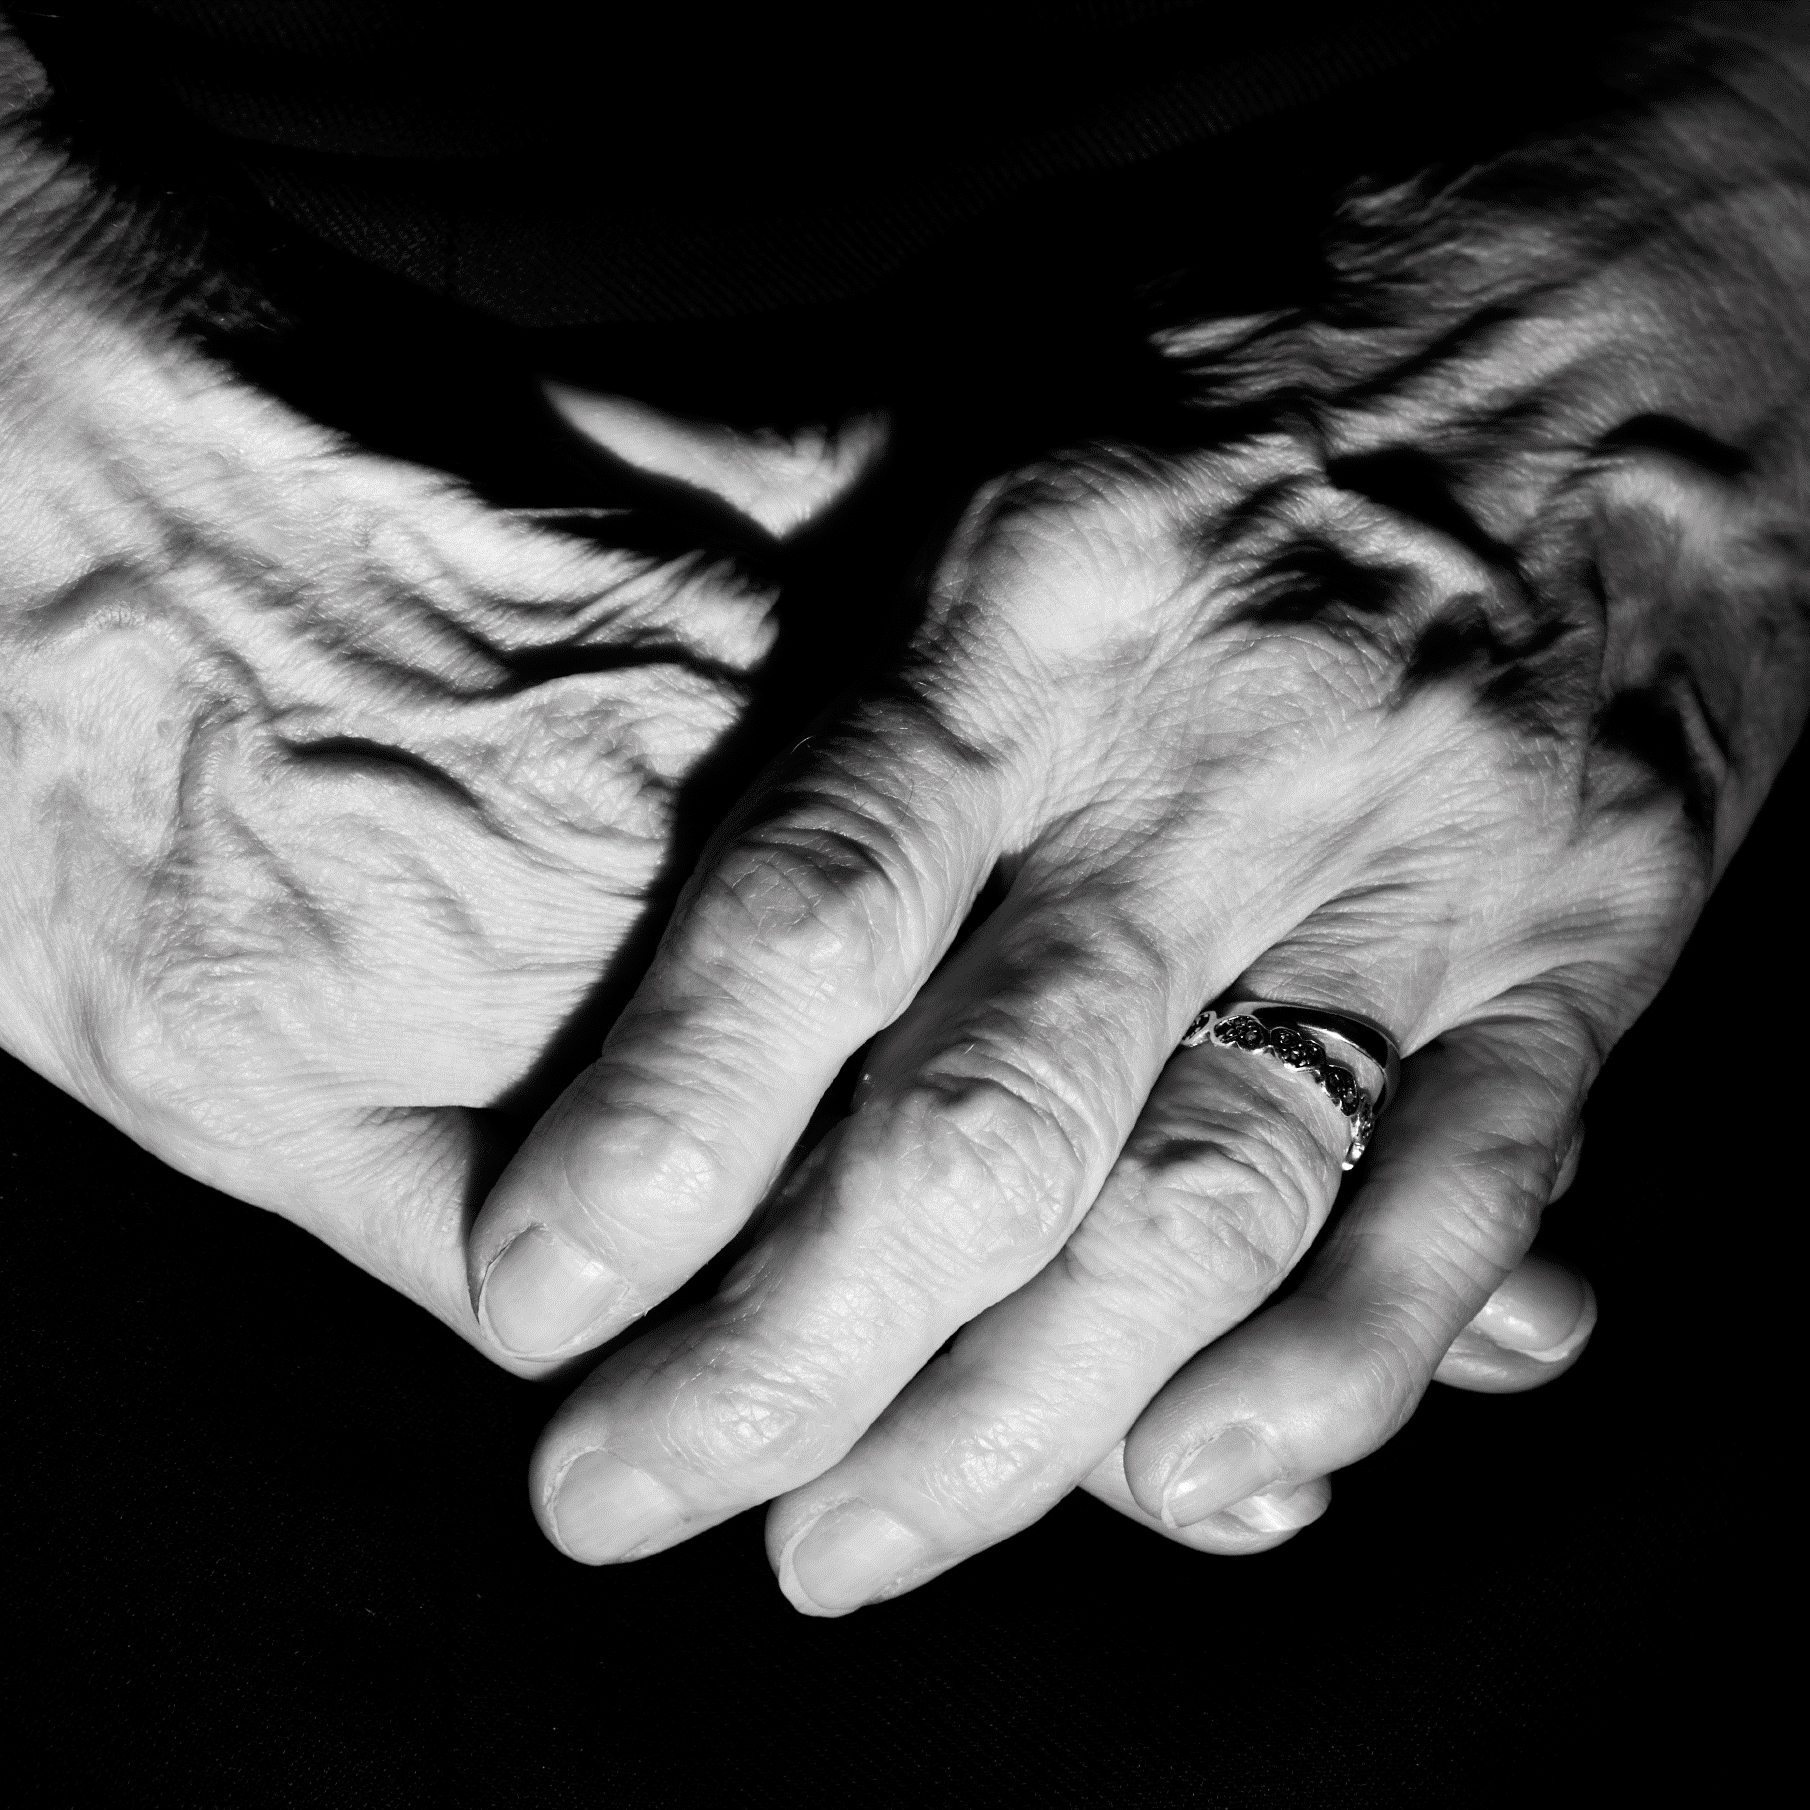 An elderley person's hands clasped together, with two rings on the left second finger.